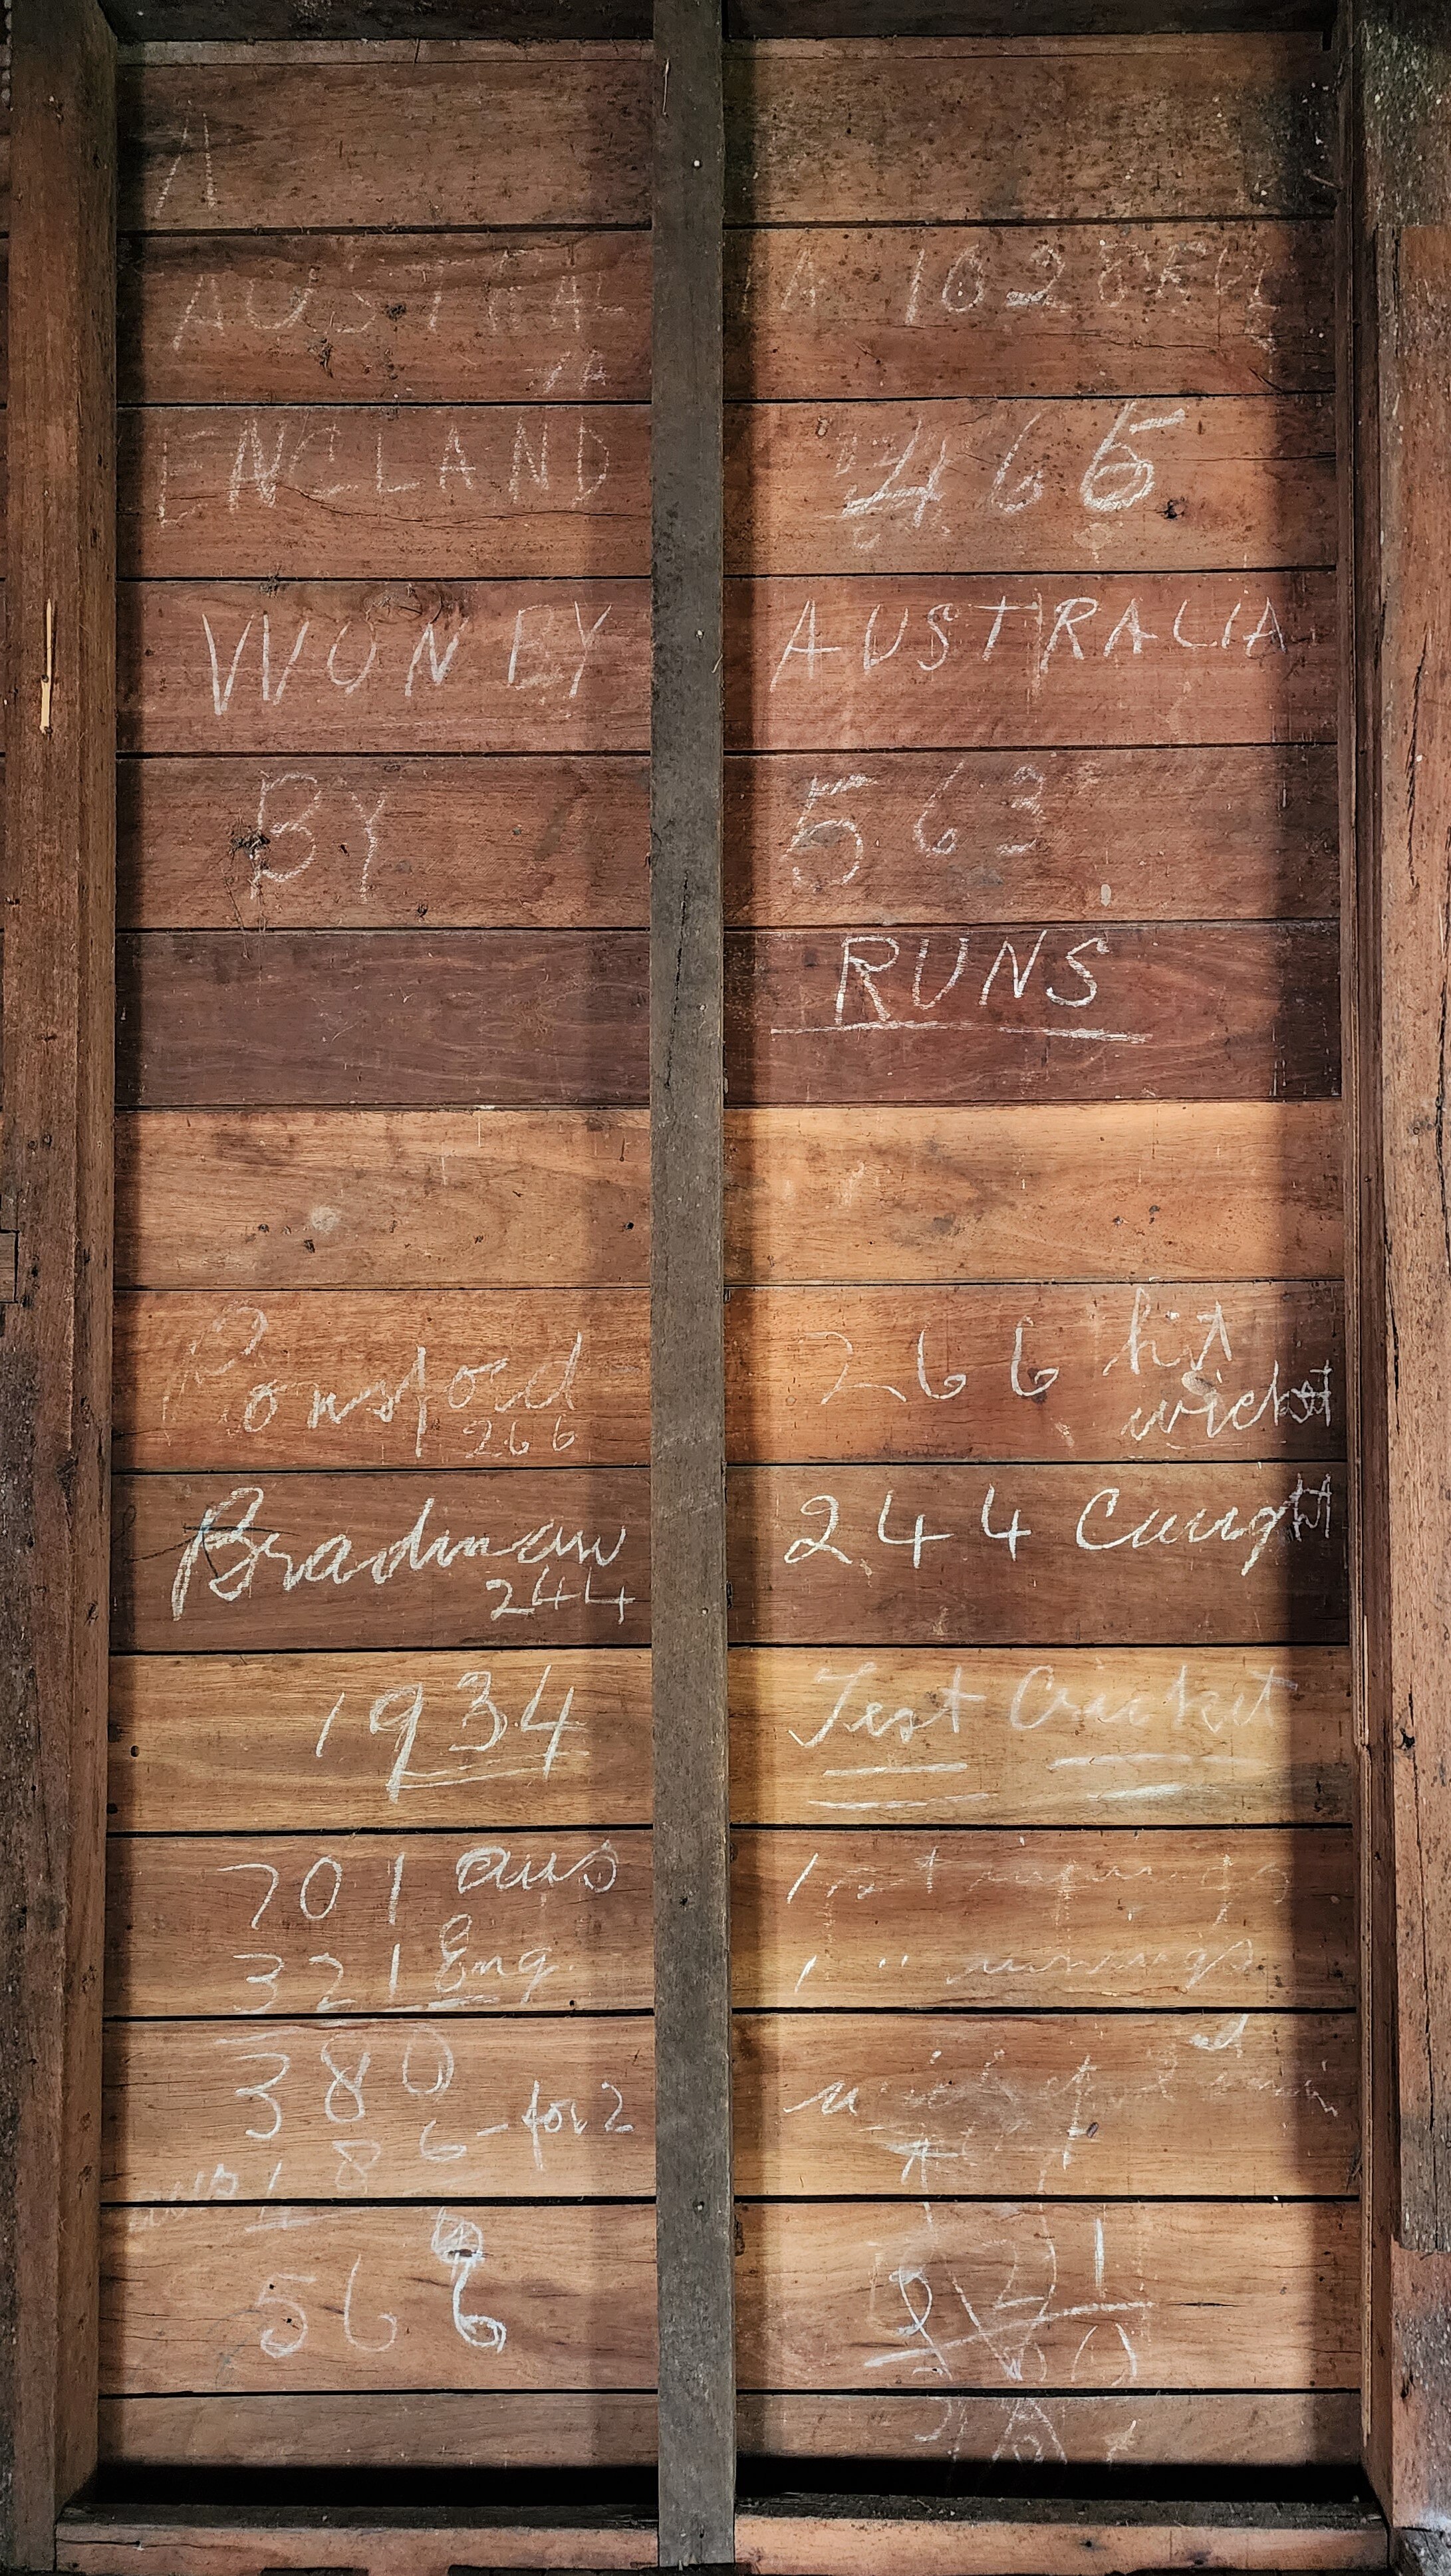 Names and scores of a cricket match handwritten in chalk on an internal wood wall.